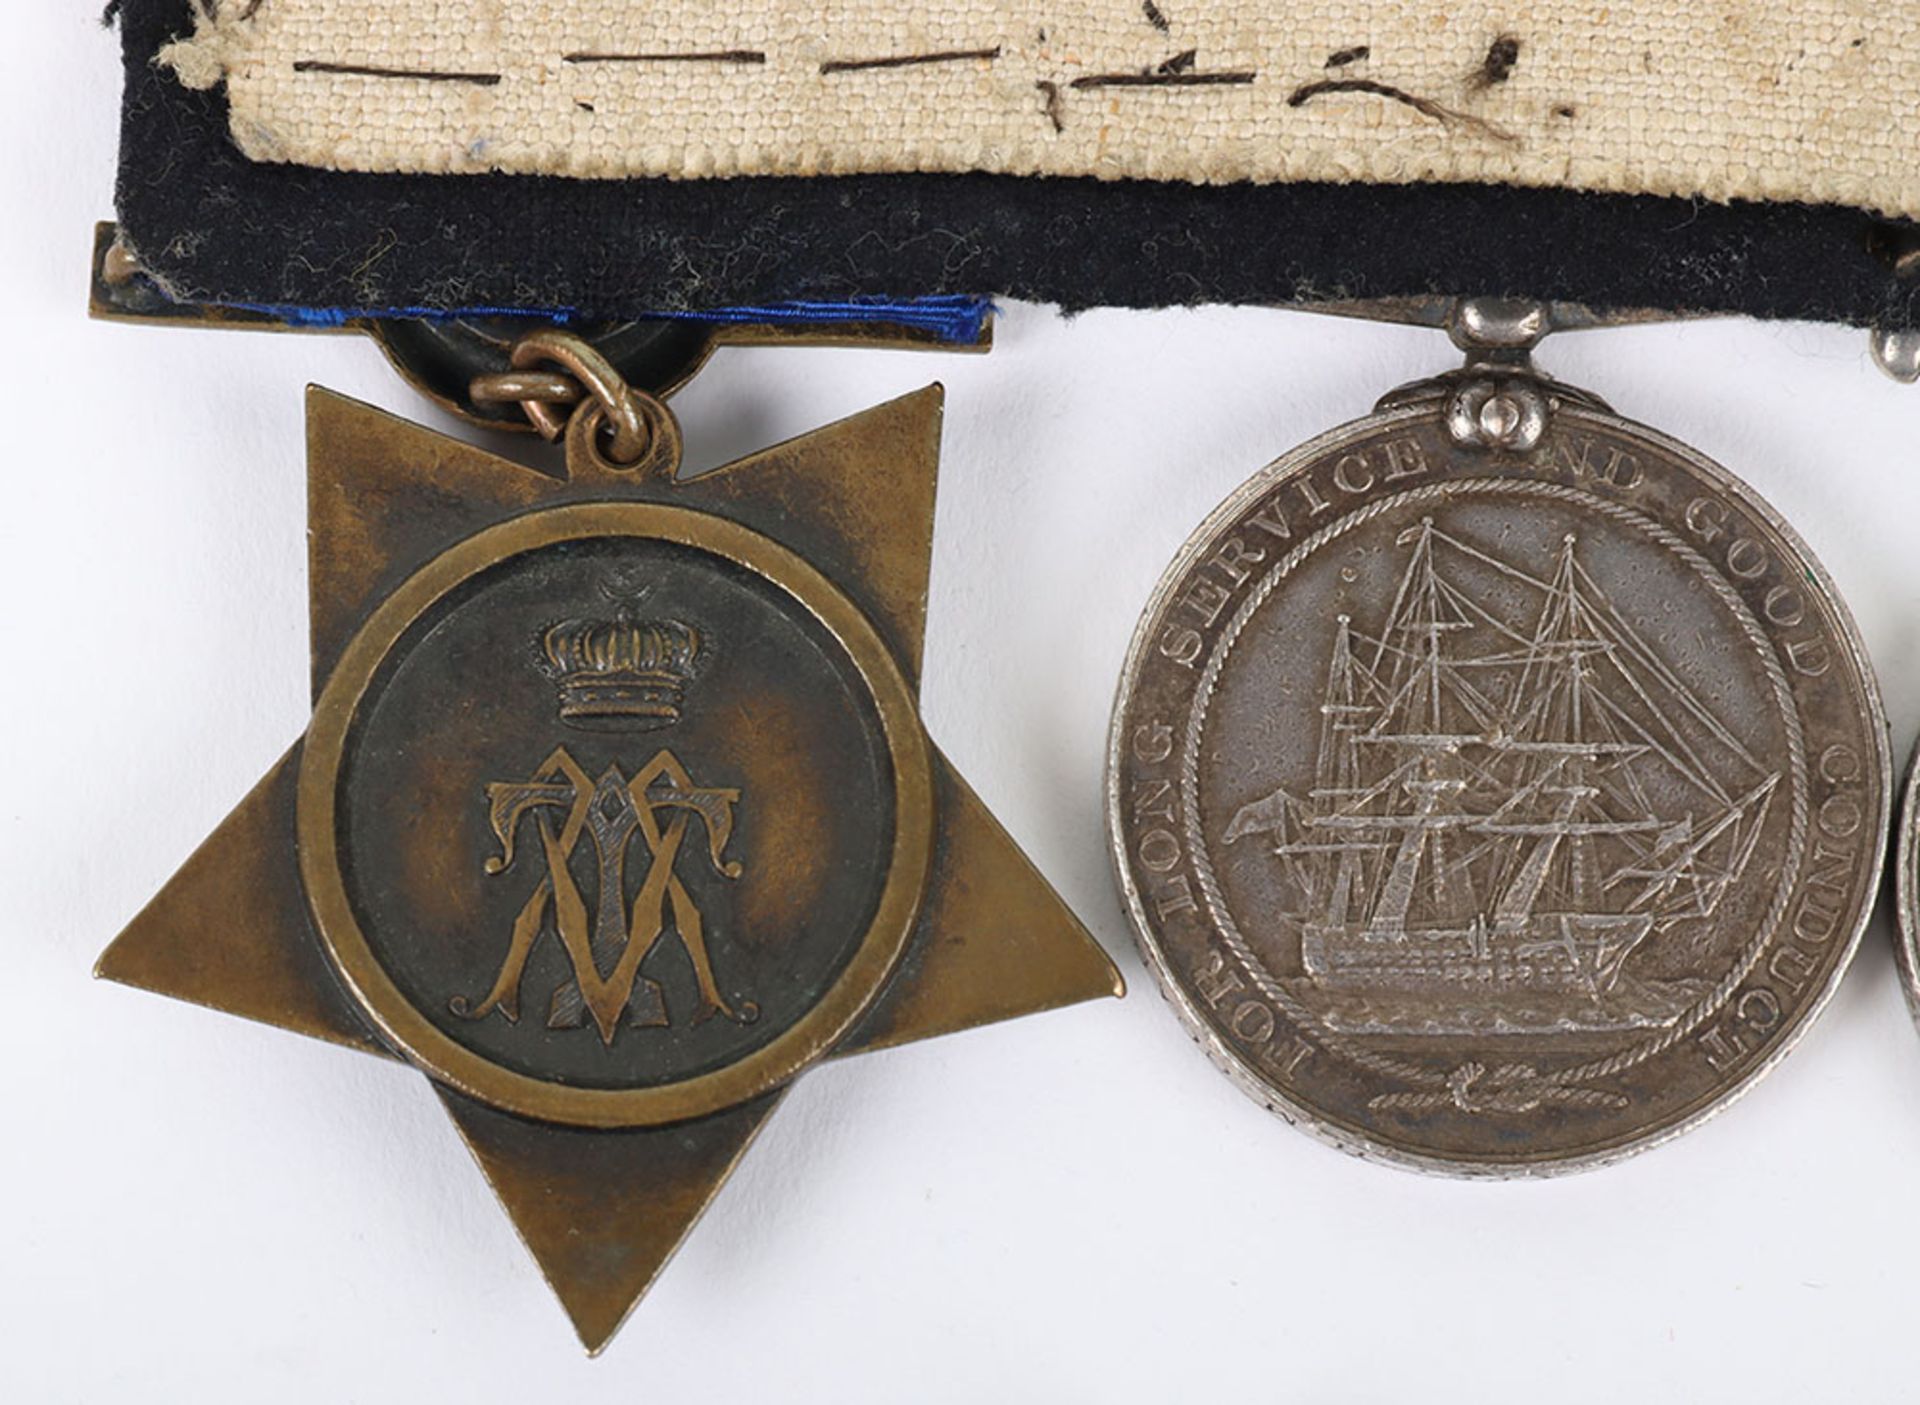 Royal Navy Long Service Medal Group of Three for Service in the 1882 Egypt Campaign - Image 9 of 9